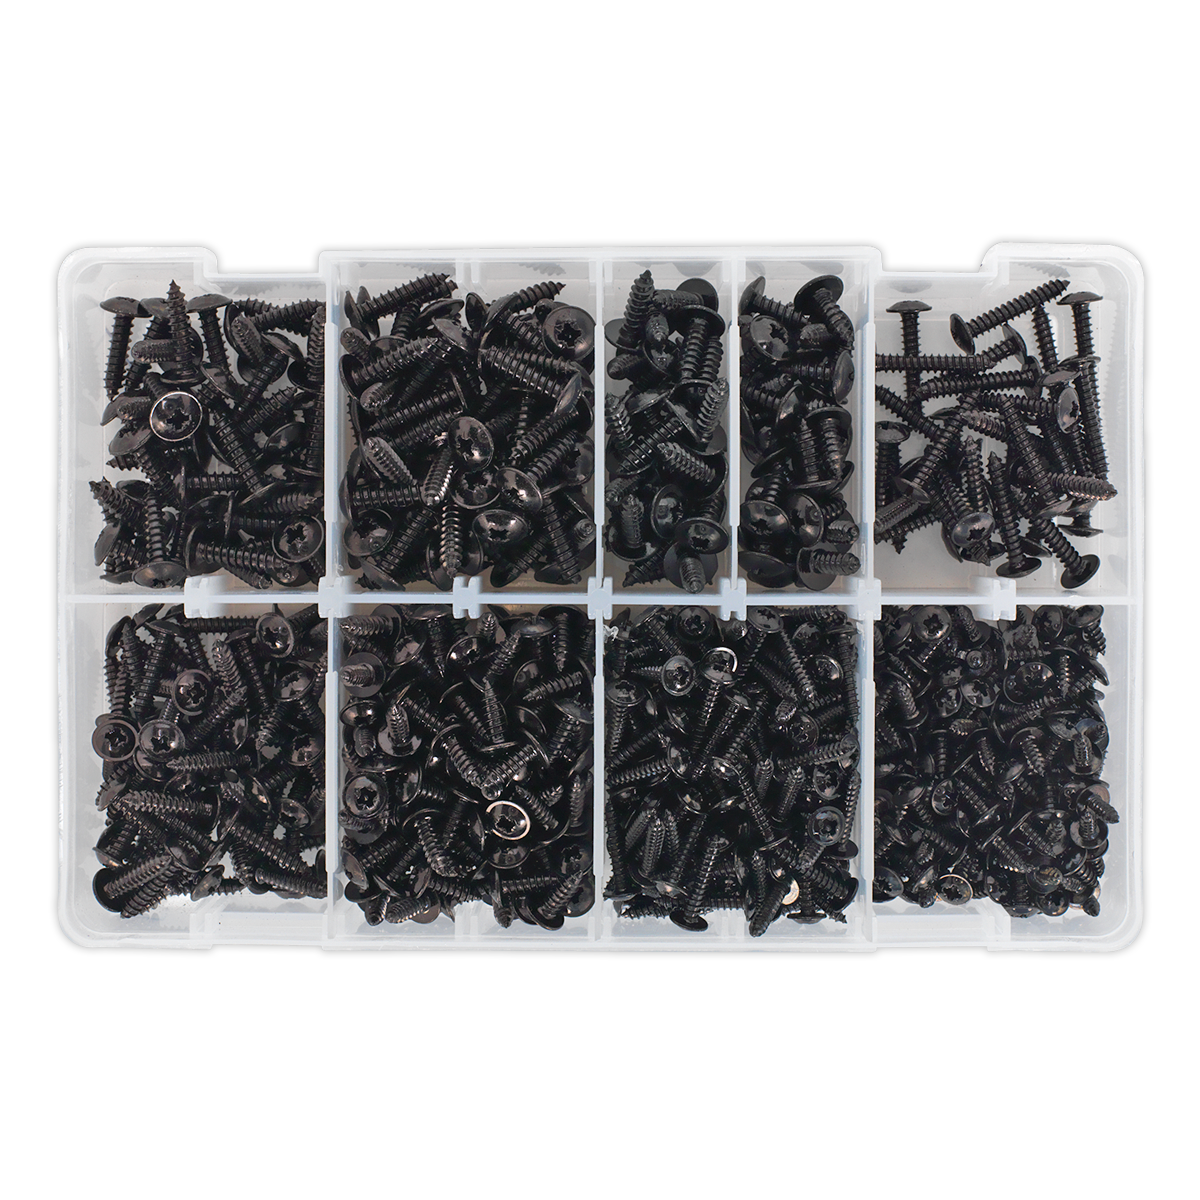 Self-Tapping Screw Assortment 700pc Flanged Head - AB066STBK - Farming Parts